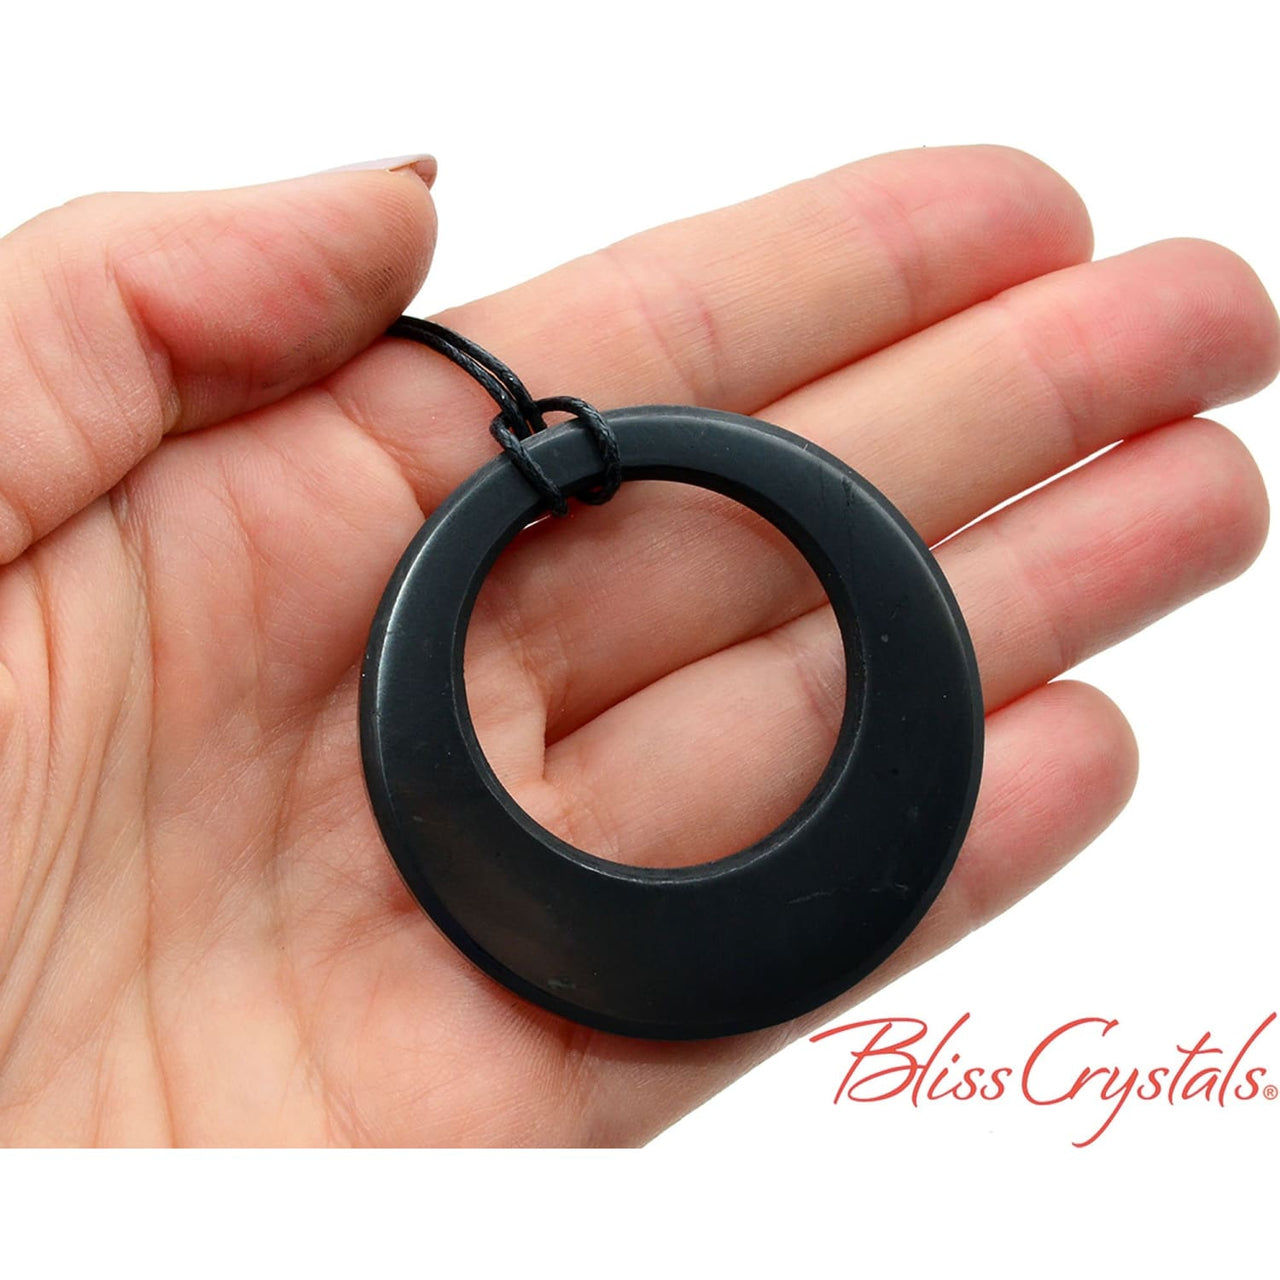 1 Shungite Stone Circle Pendant w/ Cord for protection #ST68